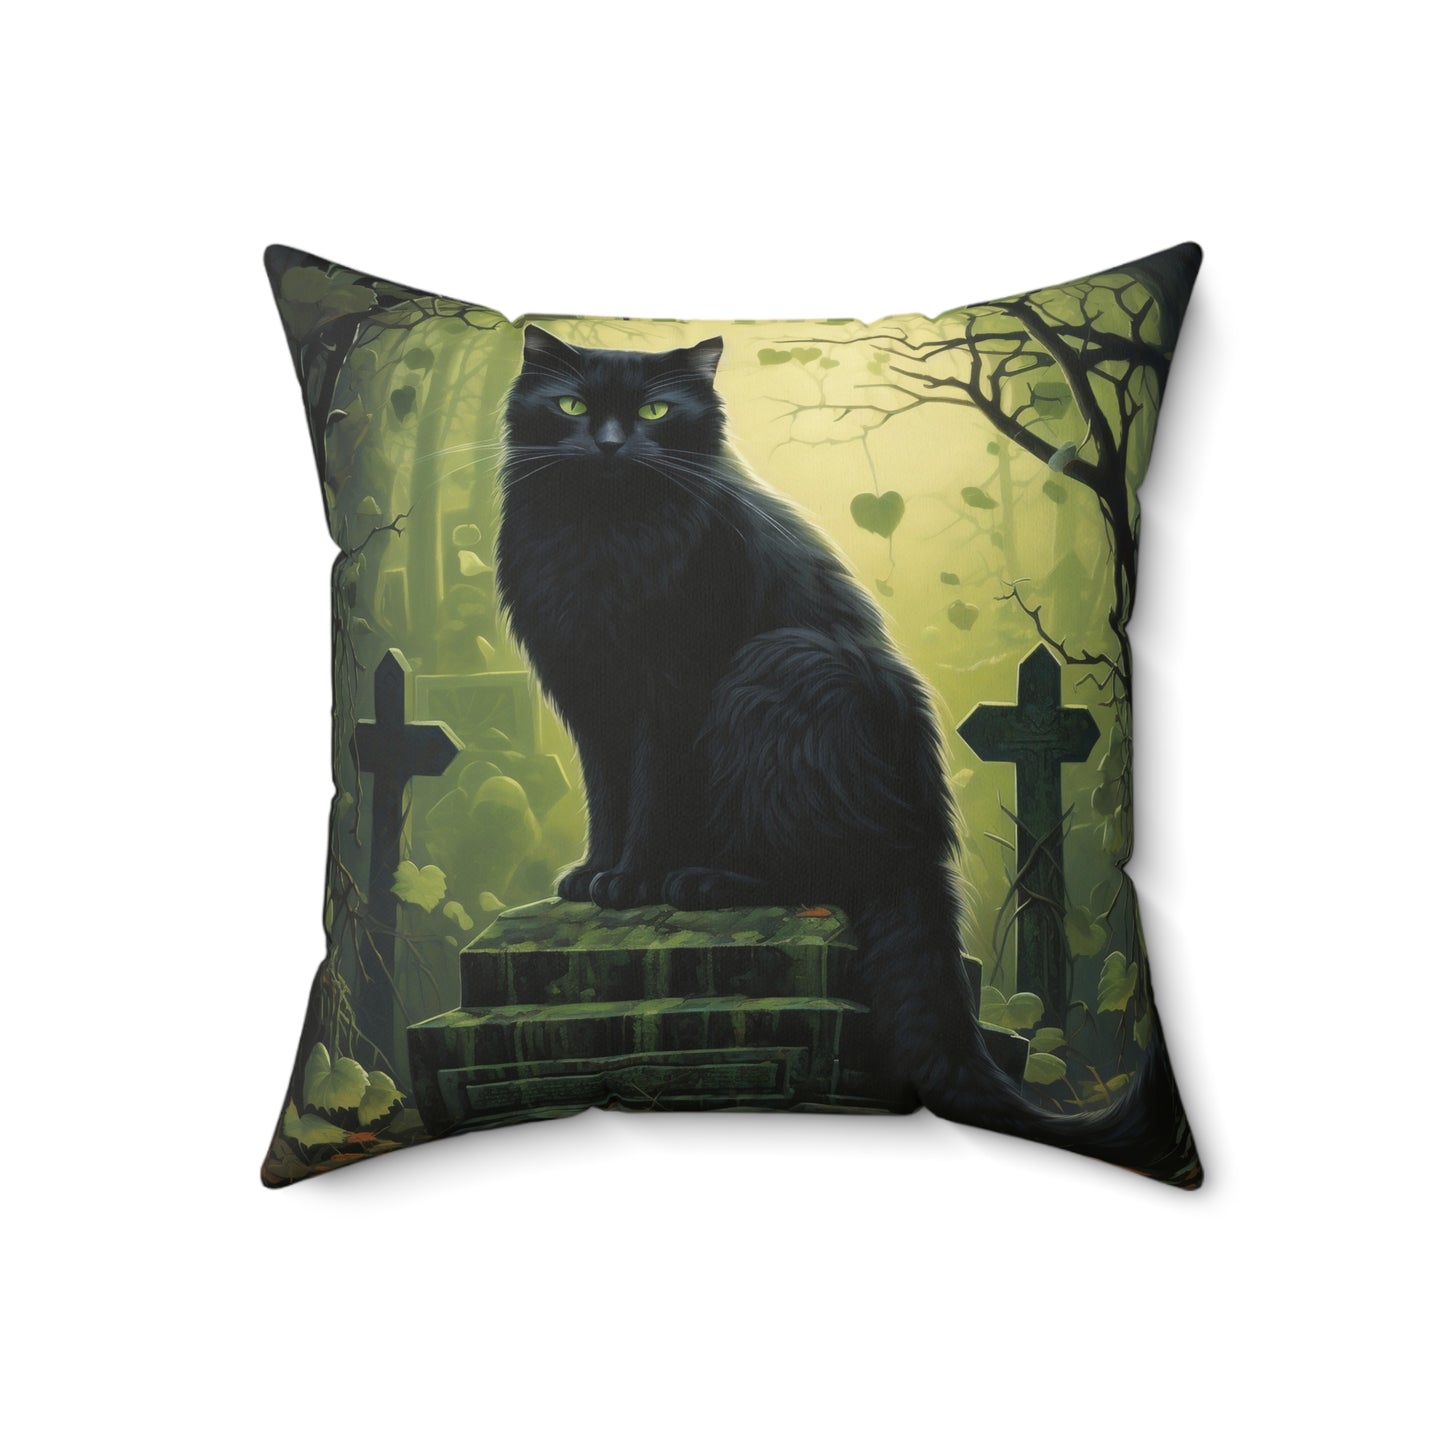 Cat Lover Square Pillow with Cover Halloween Spooky Moonlit Black Cat